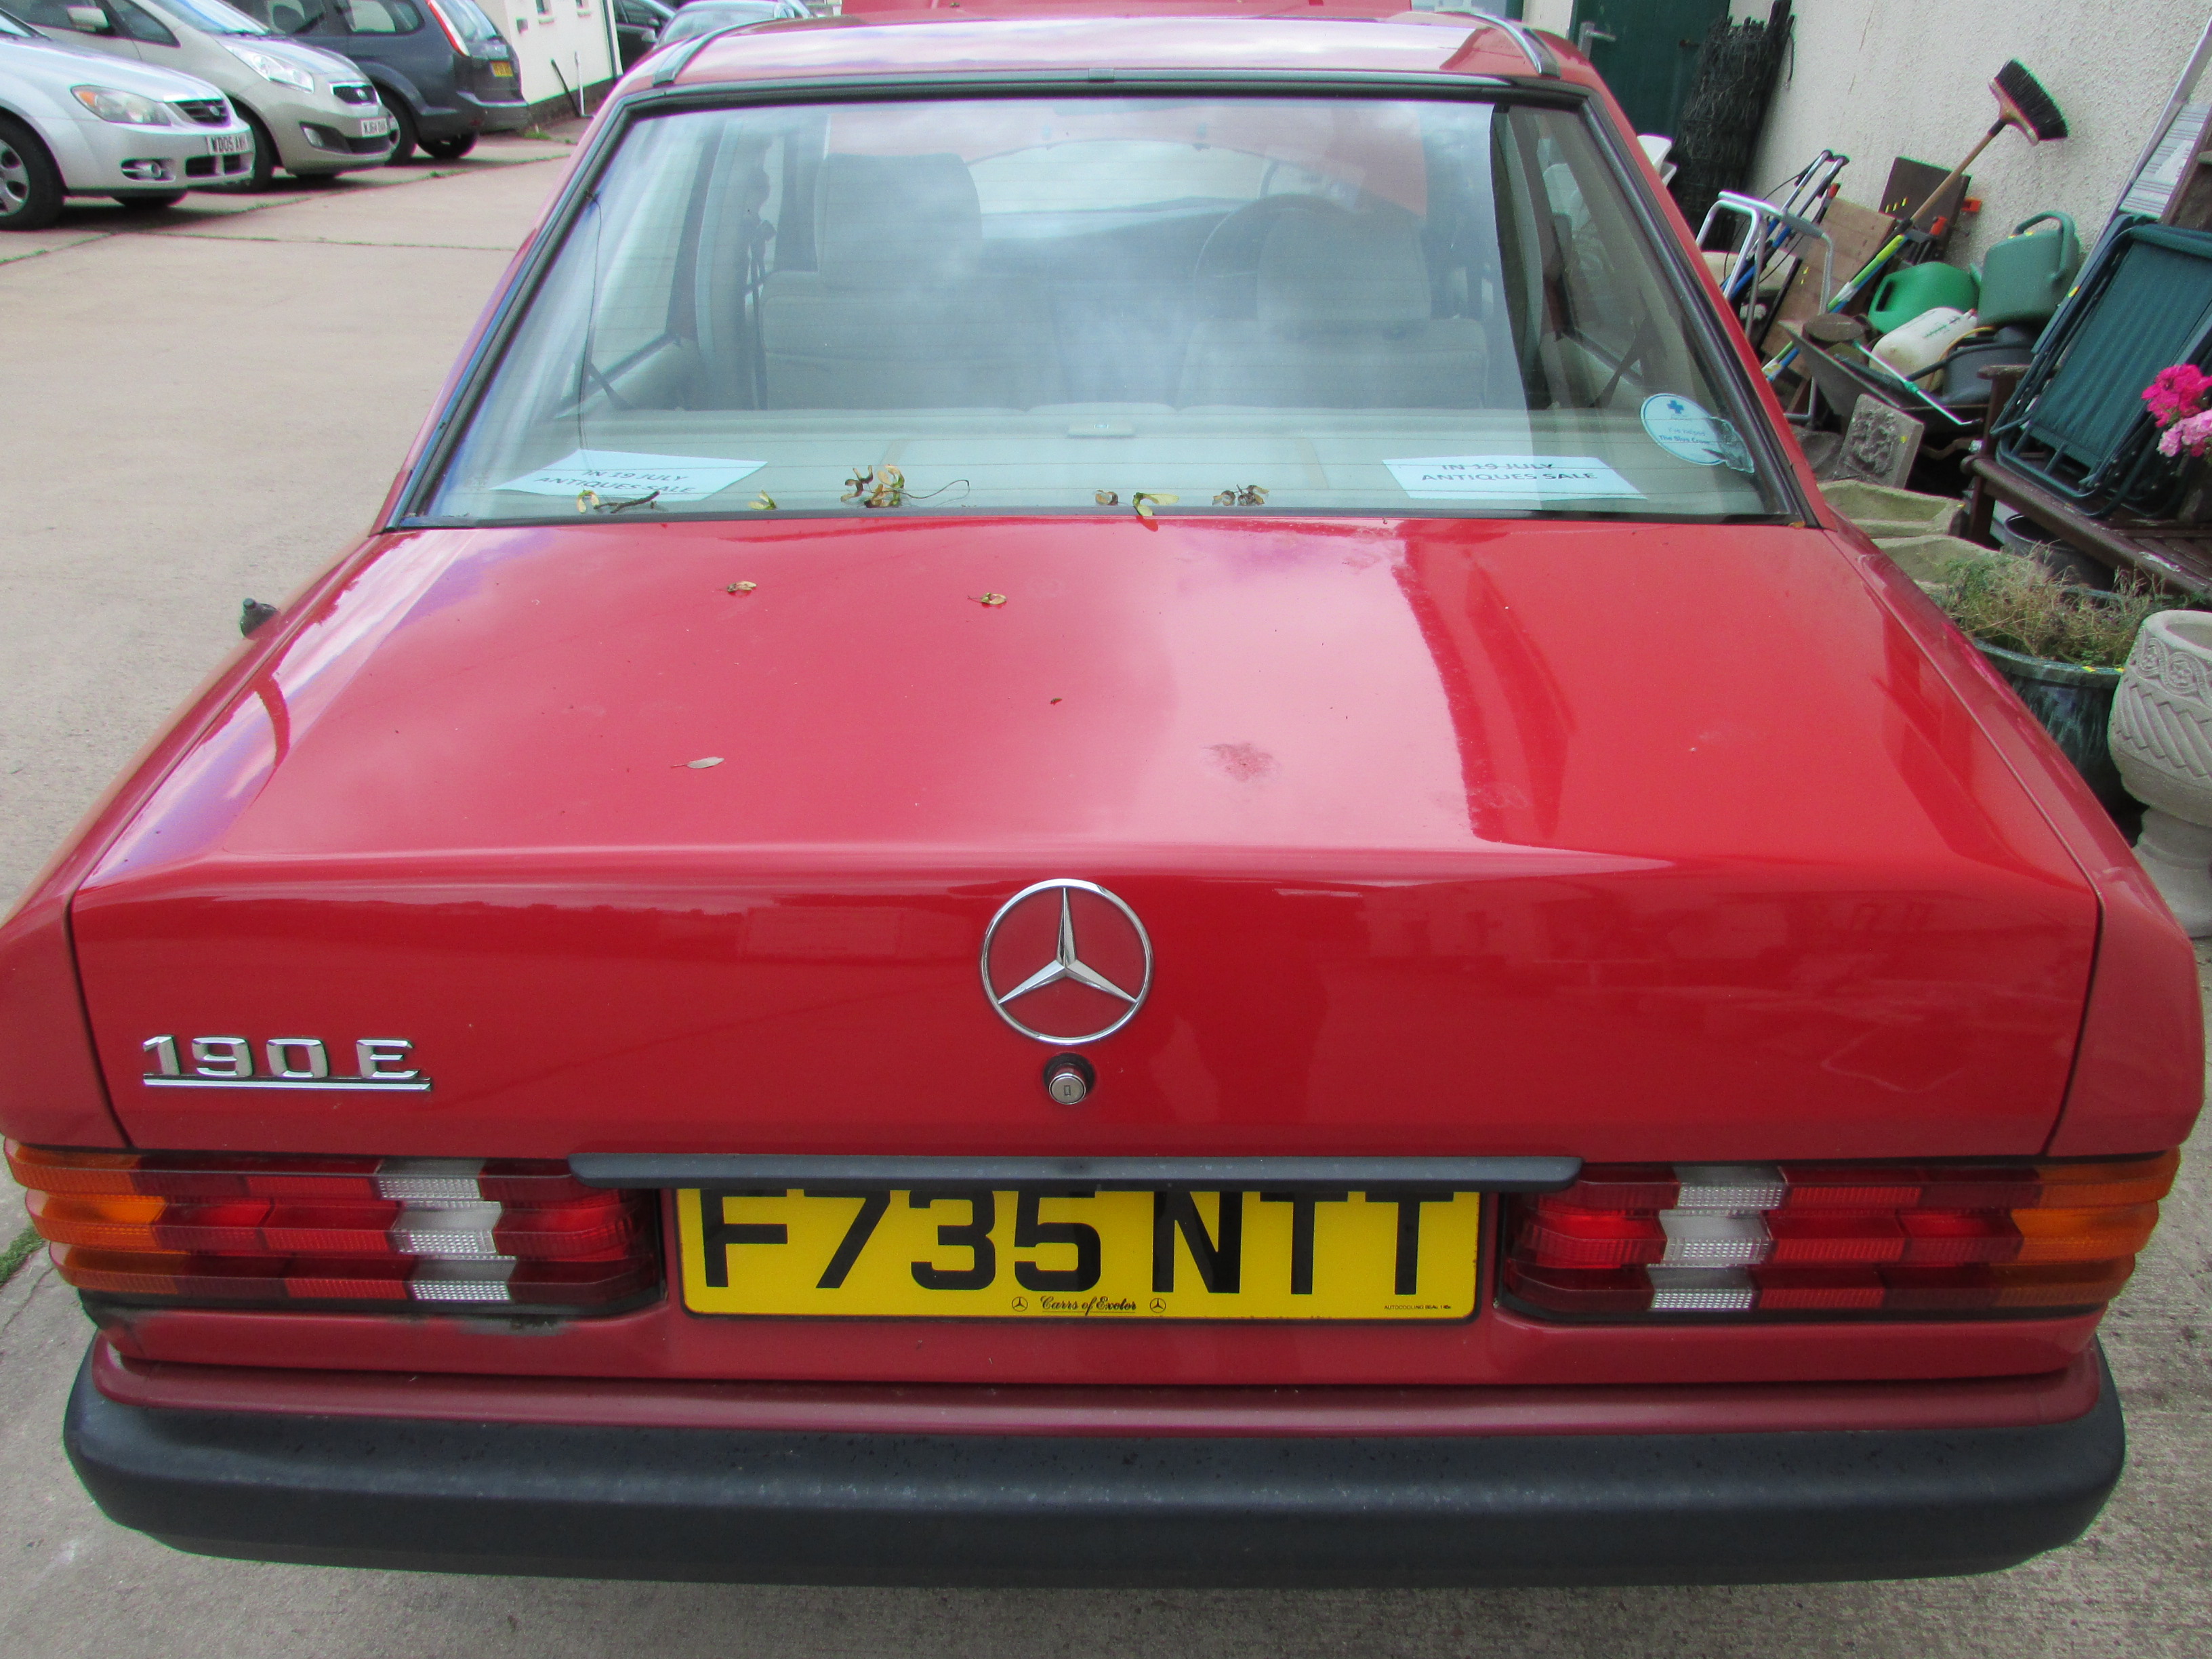 Red Mercedes 190E automatic four-door saloon, 1997 cc petrol engine, F735 NTT registered 06/09/89, - Image 6 of 12